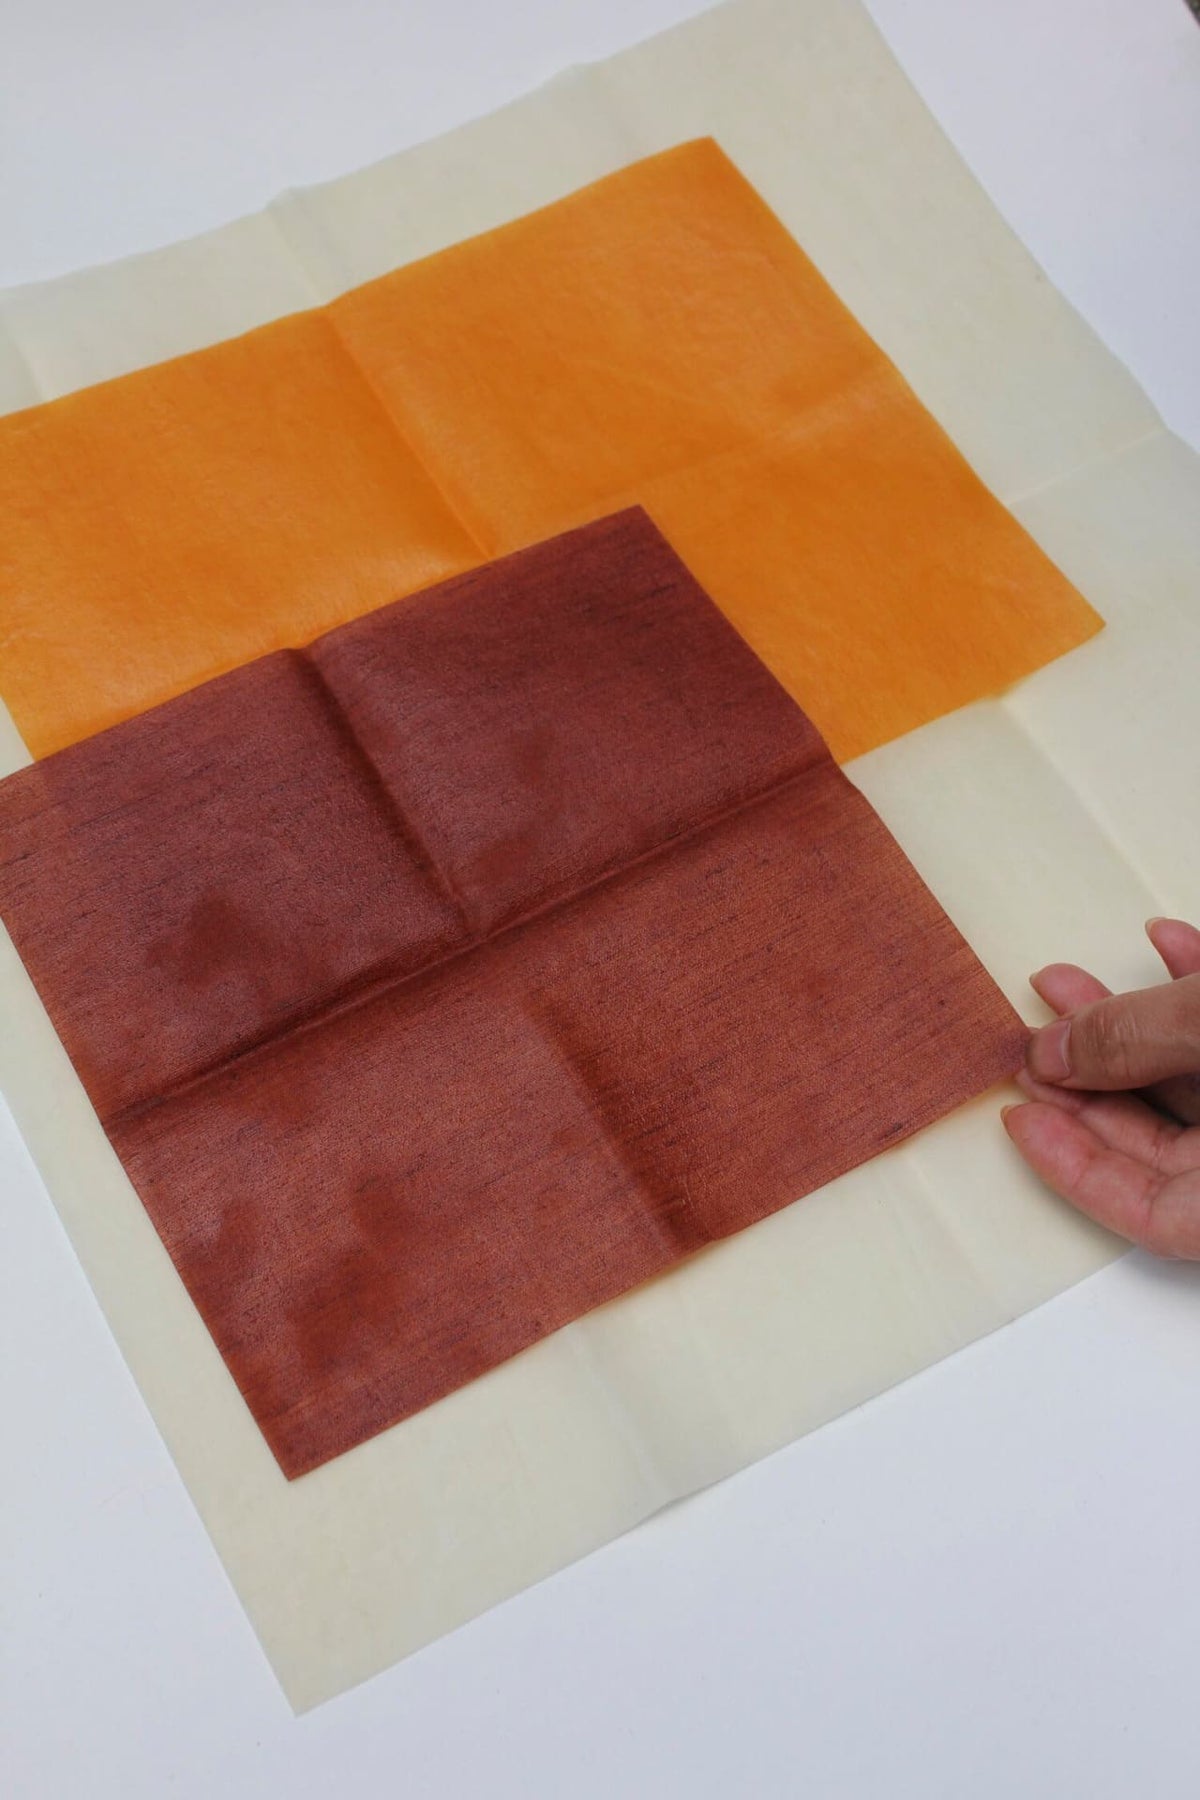 Hand positioning a piece of Ivy Waxed Linen Food Wraps fabric on top of an arrangement of orange dyed fabrics on a plain background, offering a sustainable alternative to plastic clingfilm. (Brand: Wax Atelier)